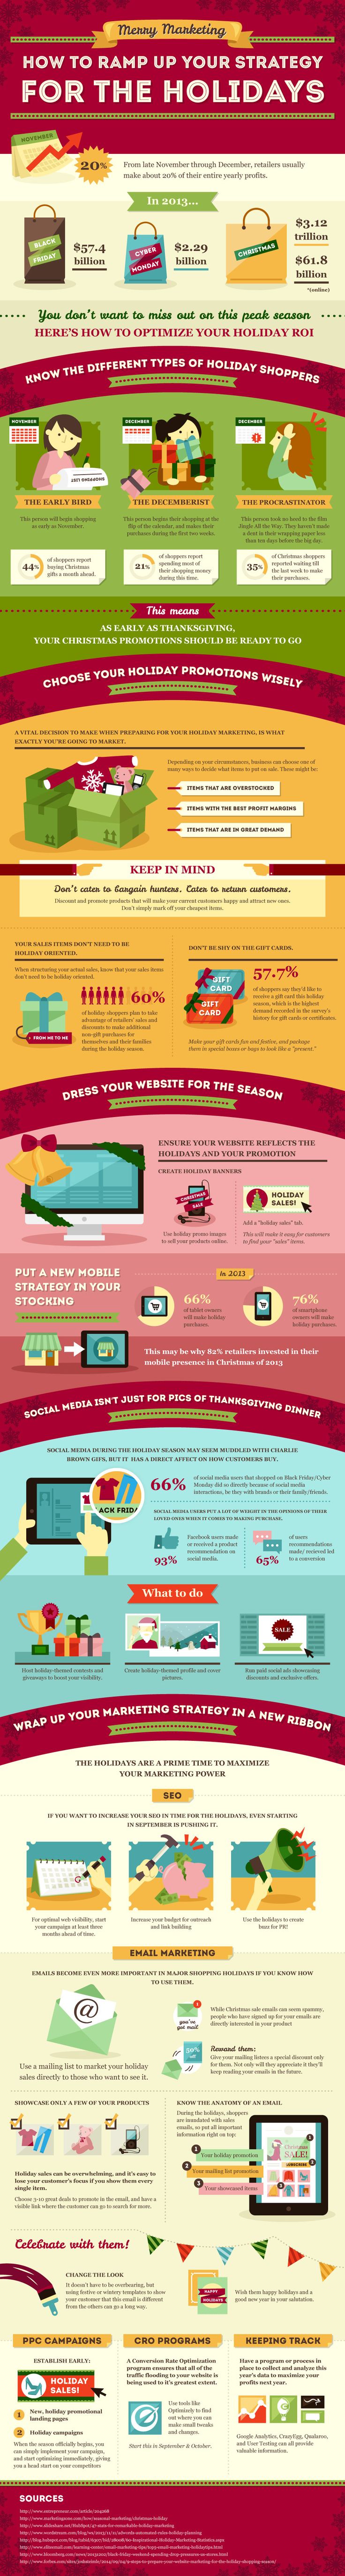 Digital-Marketing-How-to-give-your-Holiday-Marketing-Campaign-a-boost-Using-Social-Media-And-Searc Digital Marketing : How to give your Holiday Marketing Campaign a boost Using Social Media And Searc...